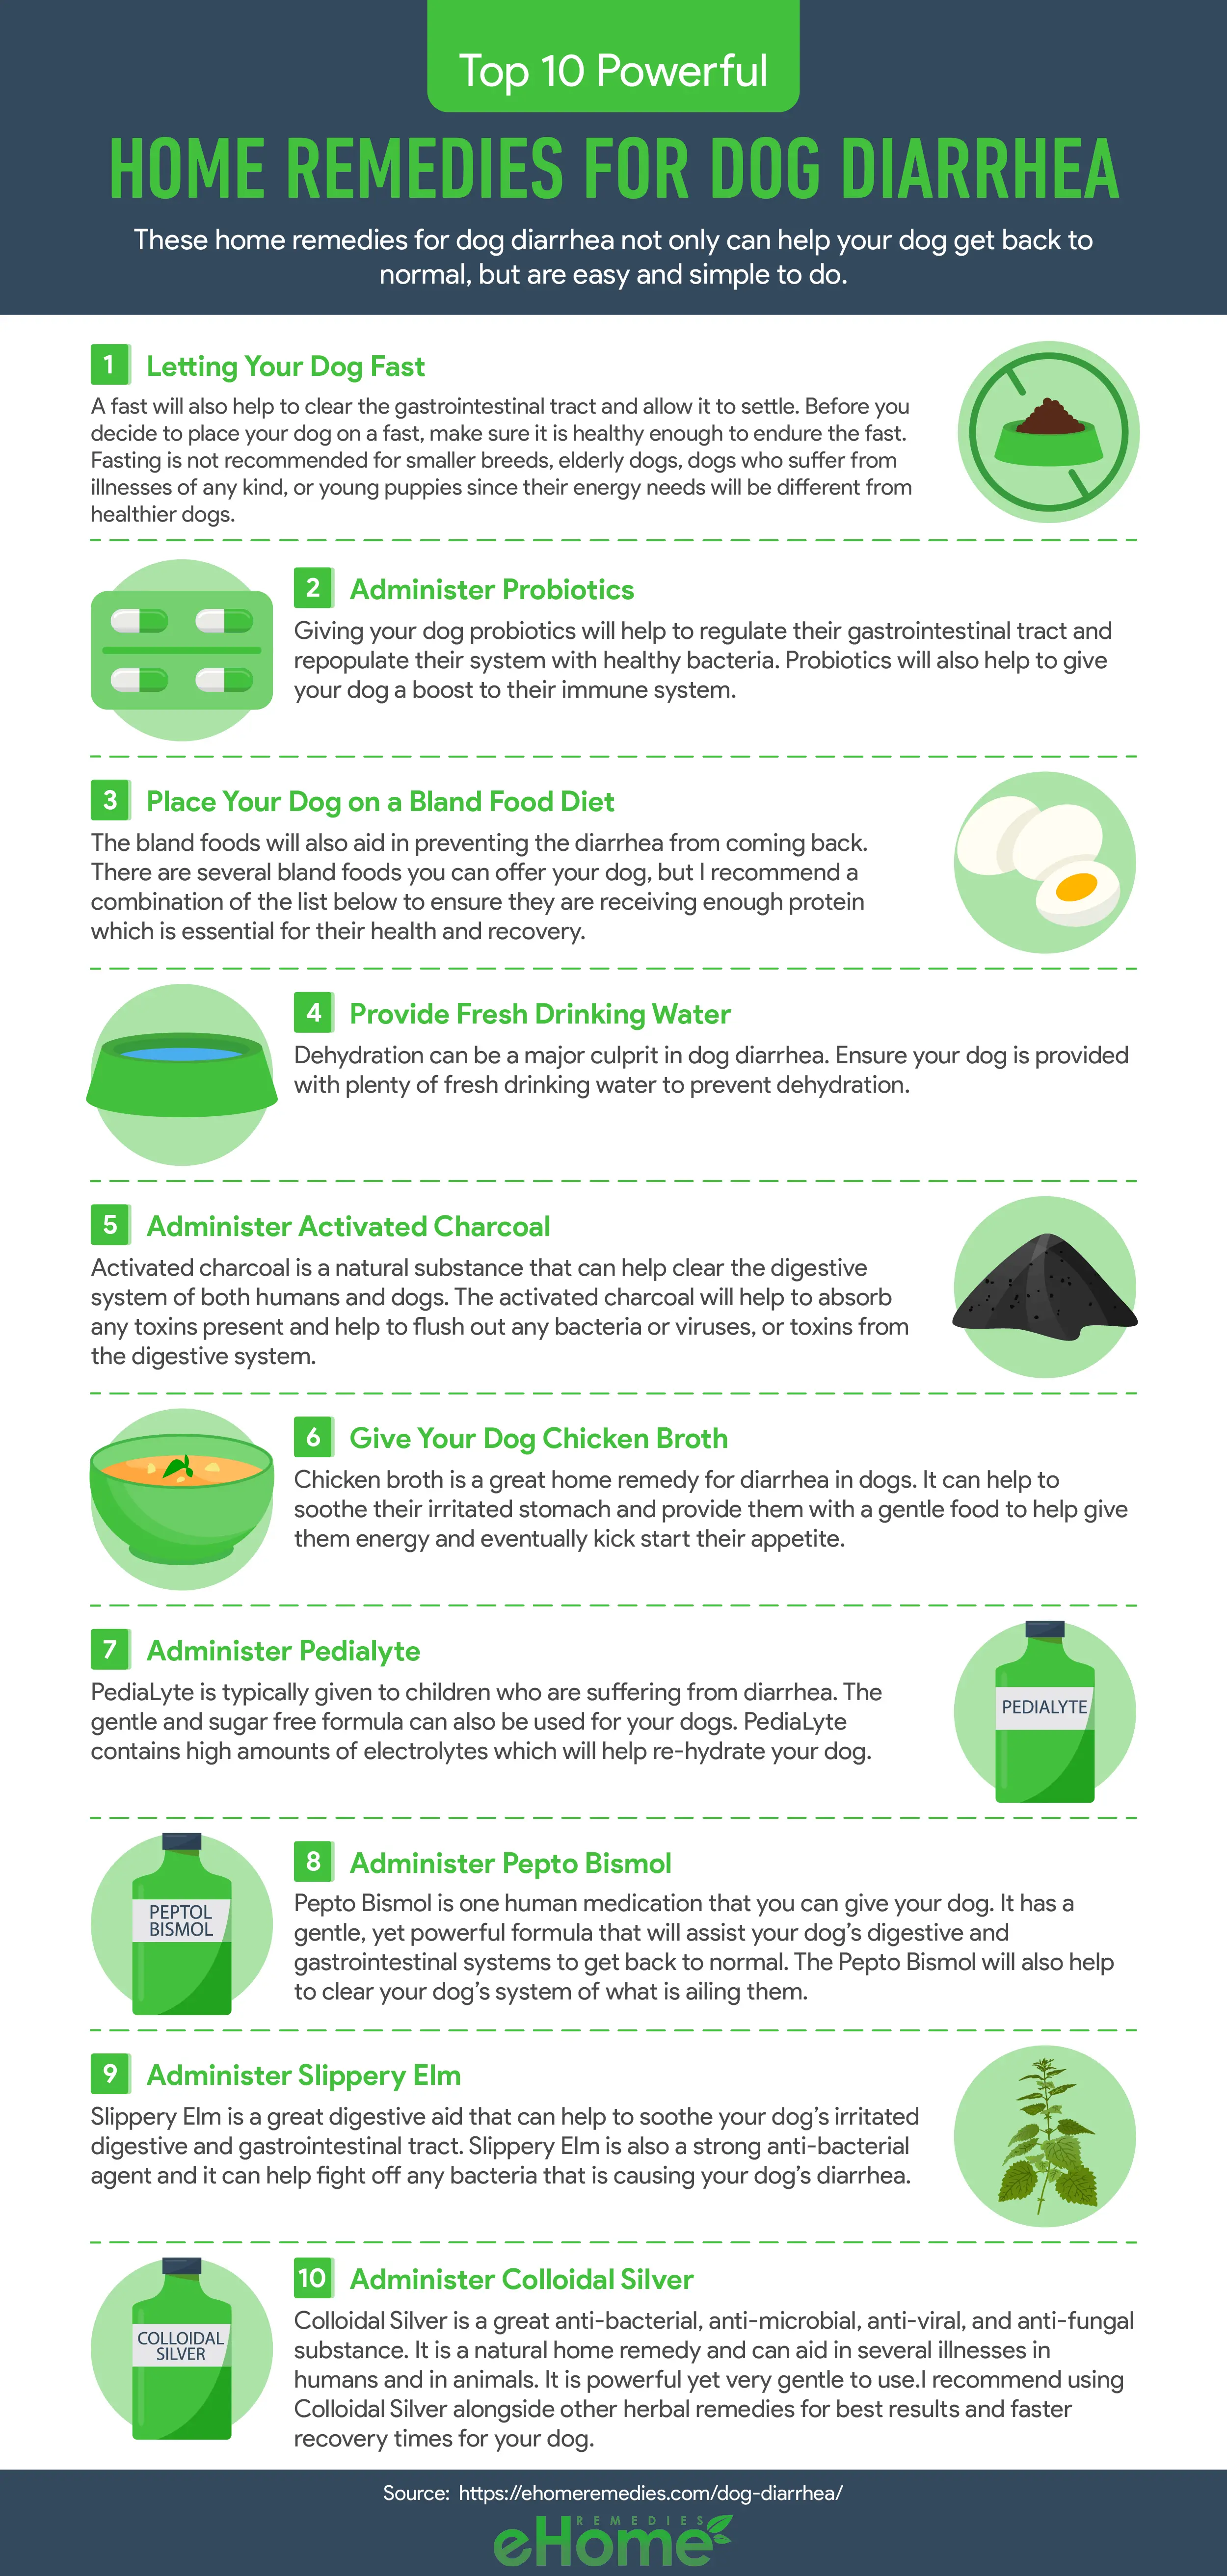 Home Remedies for Dog Diarrhea Infographic